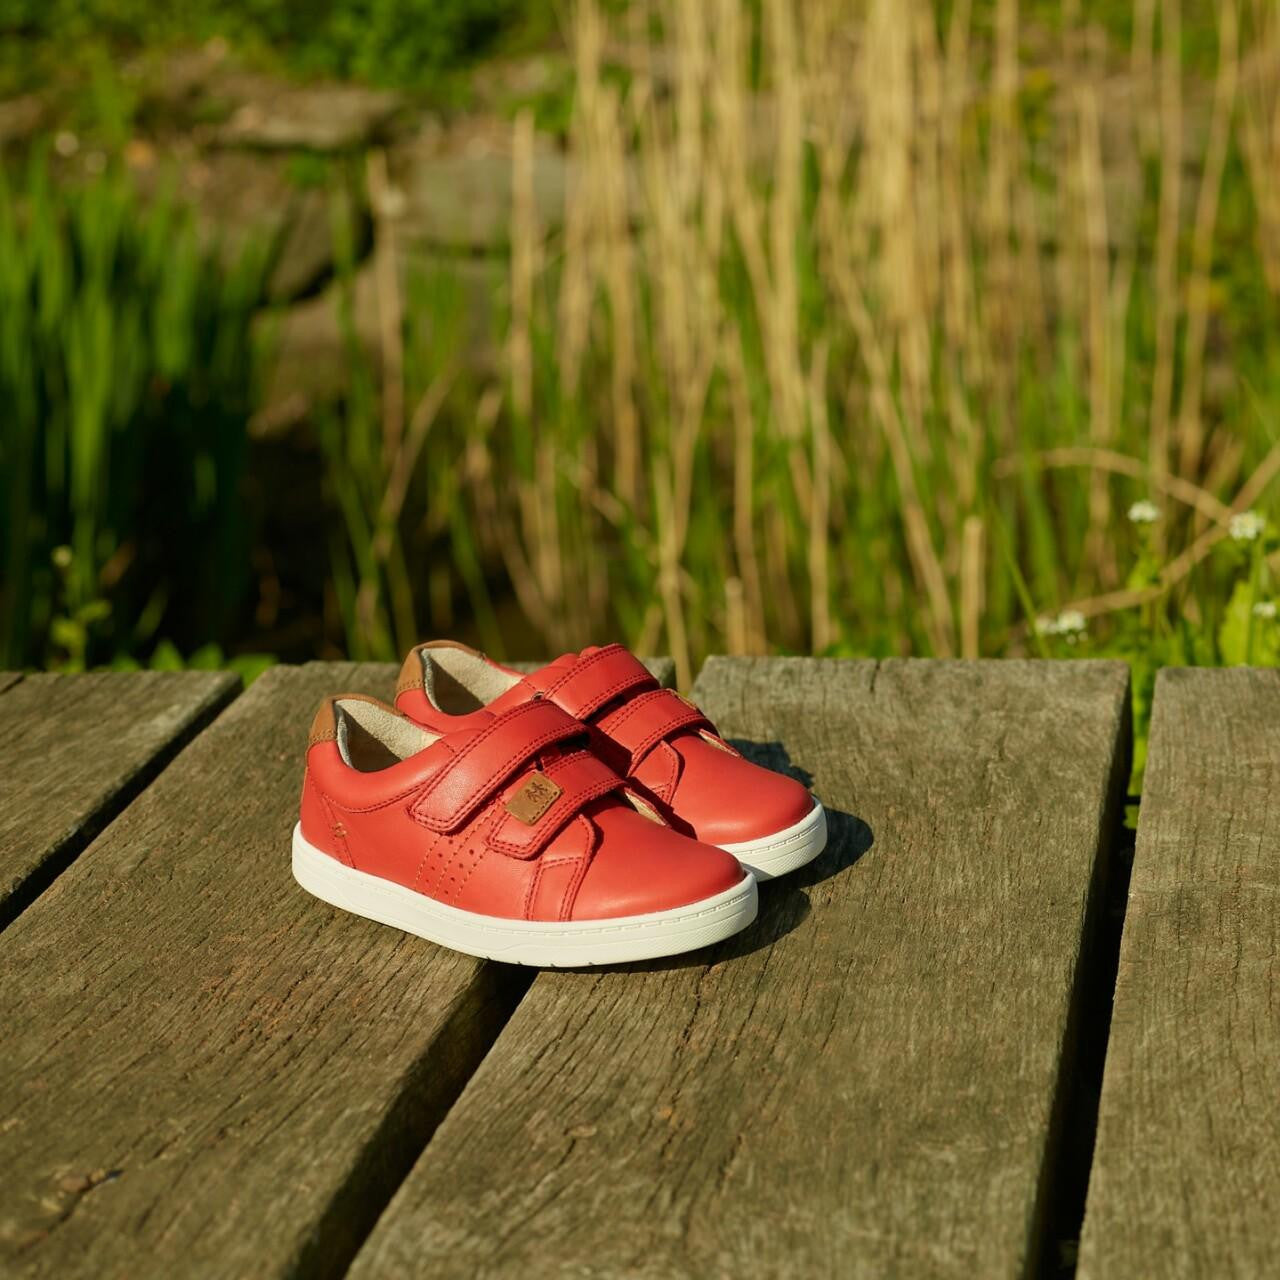 A pair of boys casual shoes by Start Rite, style Explore, in red leather with double velcro fastening. Angled view.